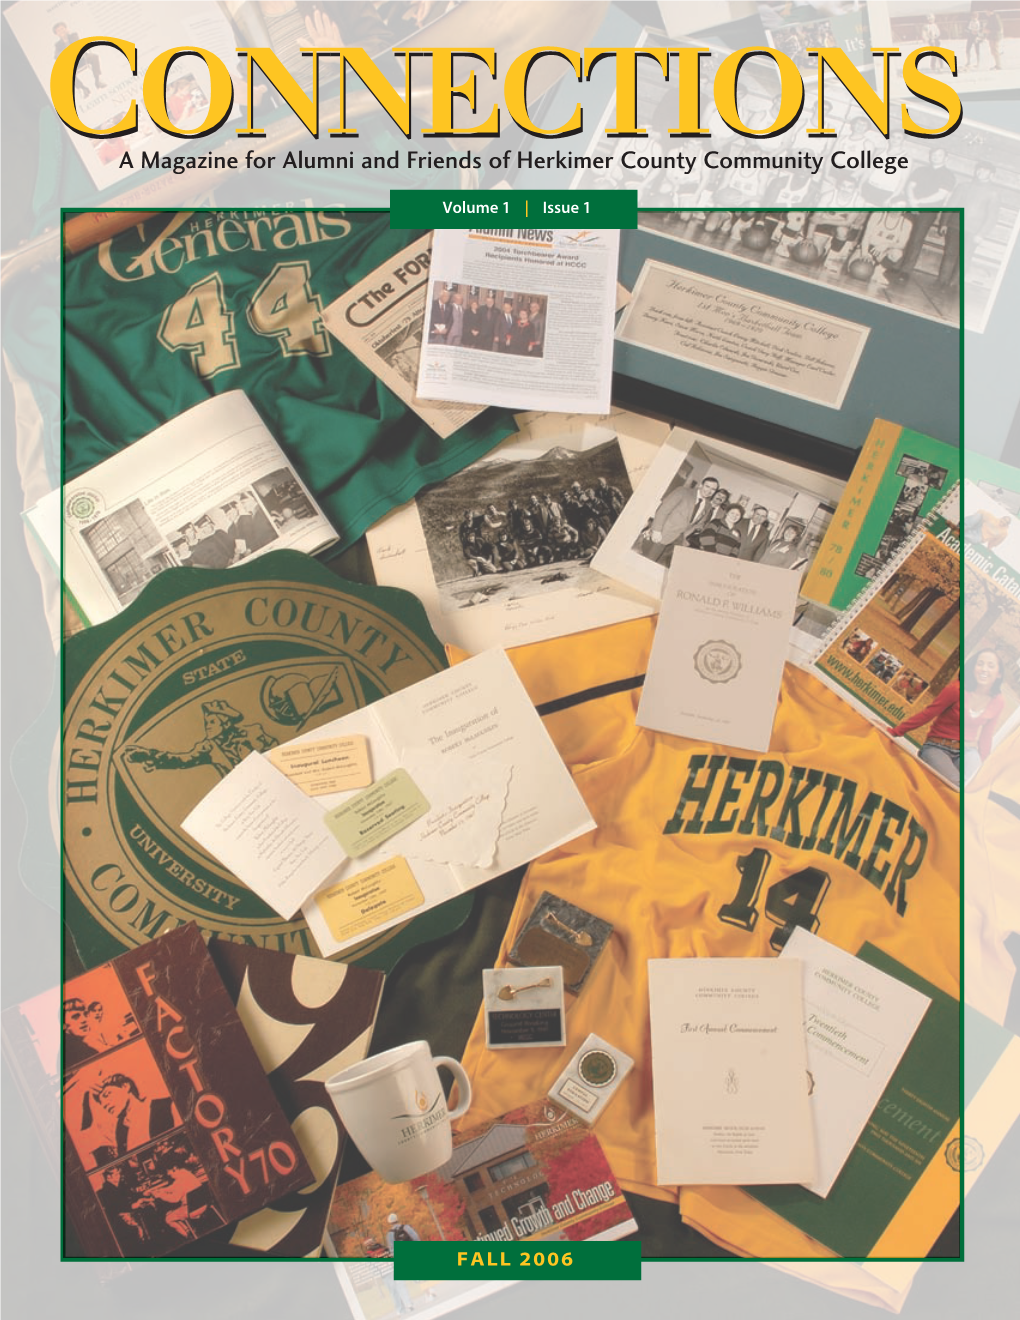 A Magazine for Alumni and Friends of Herkimer County Community College